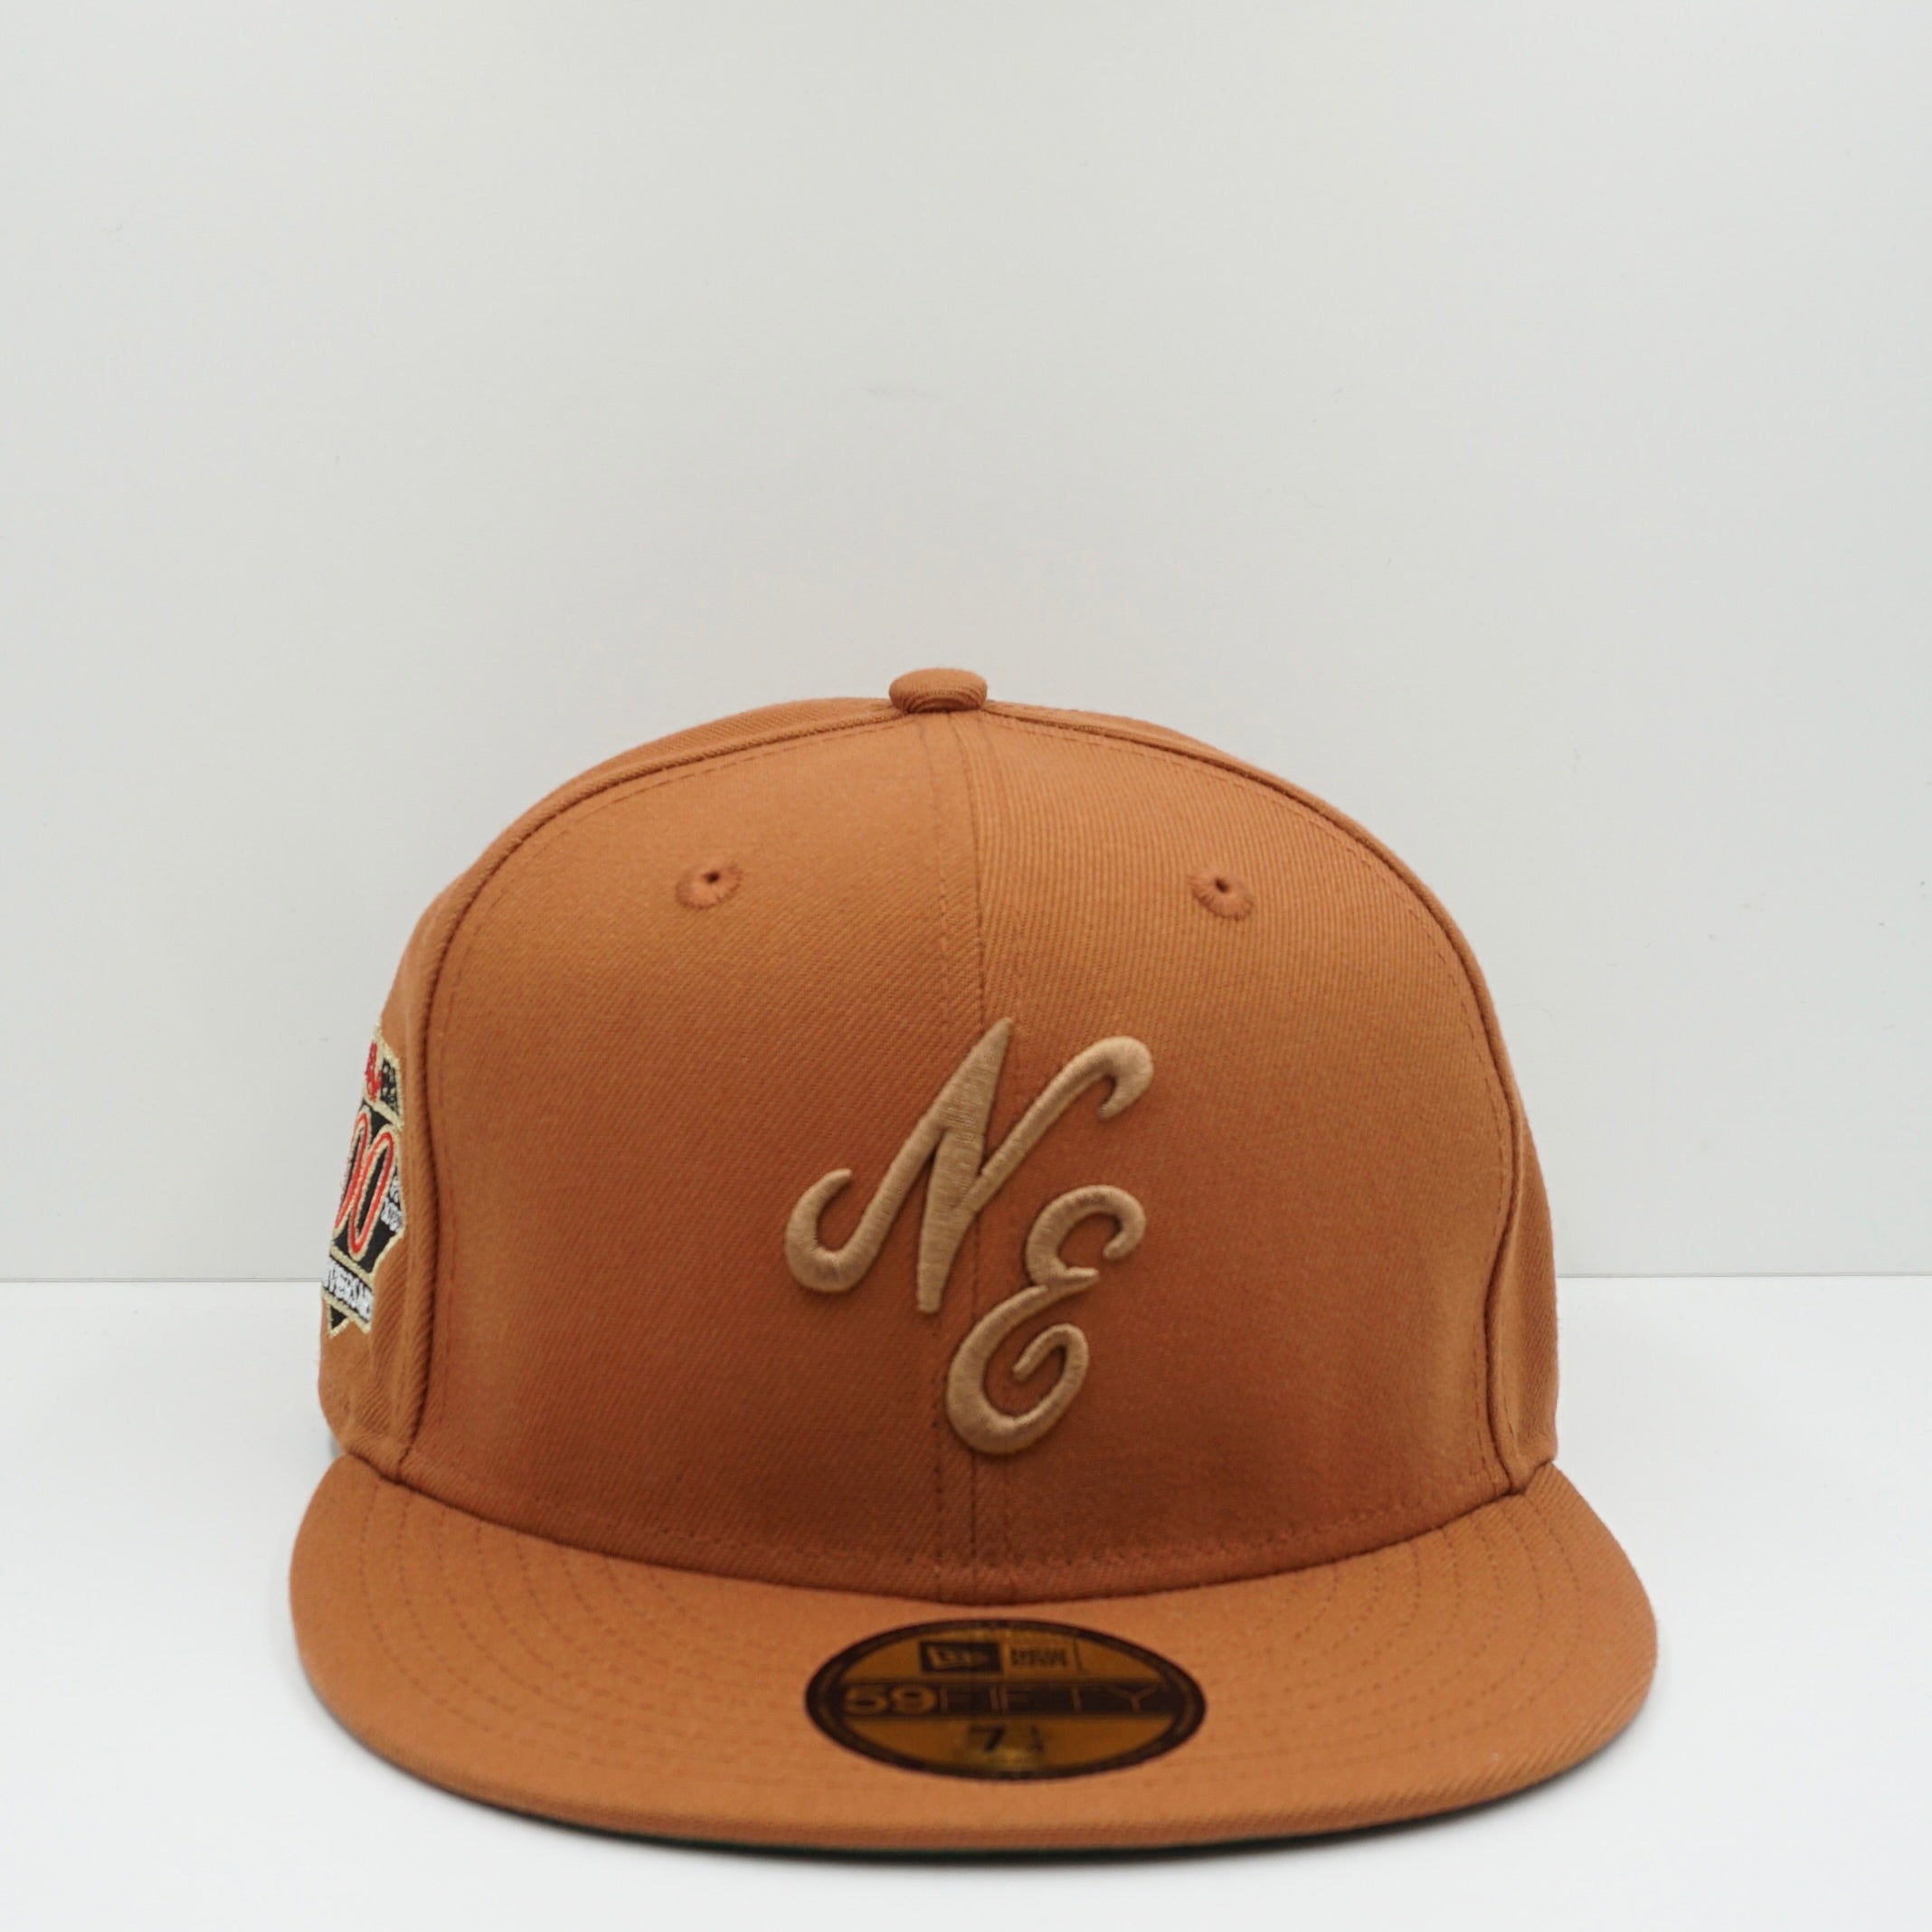 New Era 100th Anniversary Clay Fitted Cap